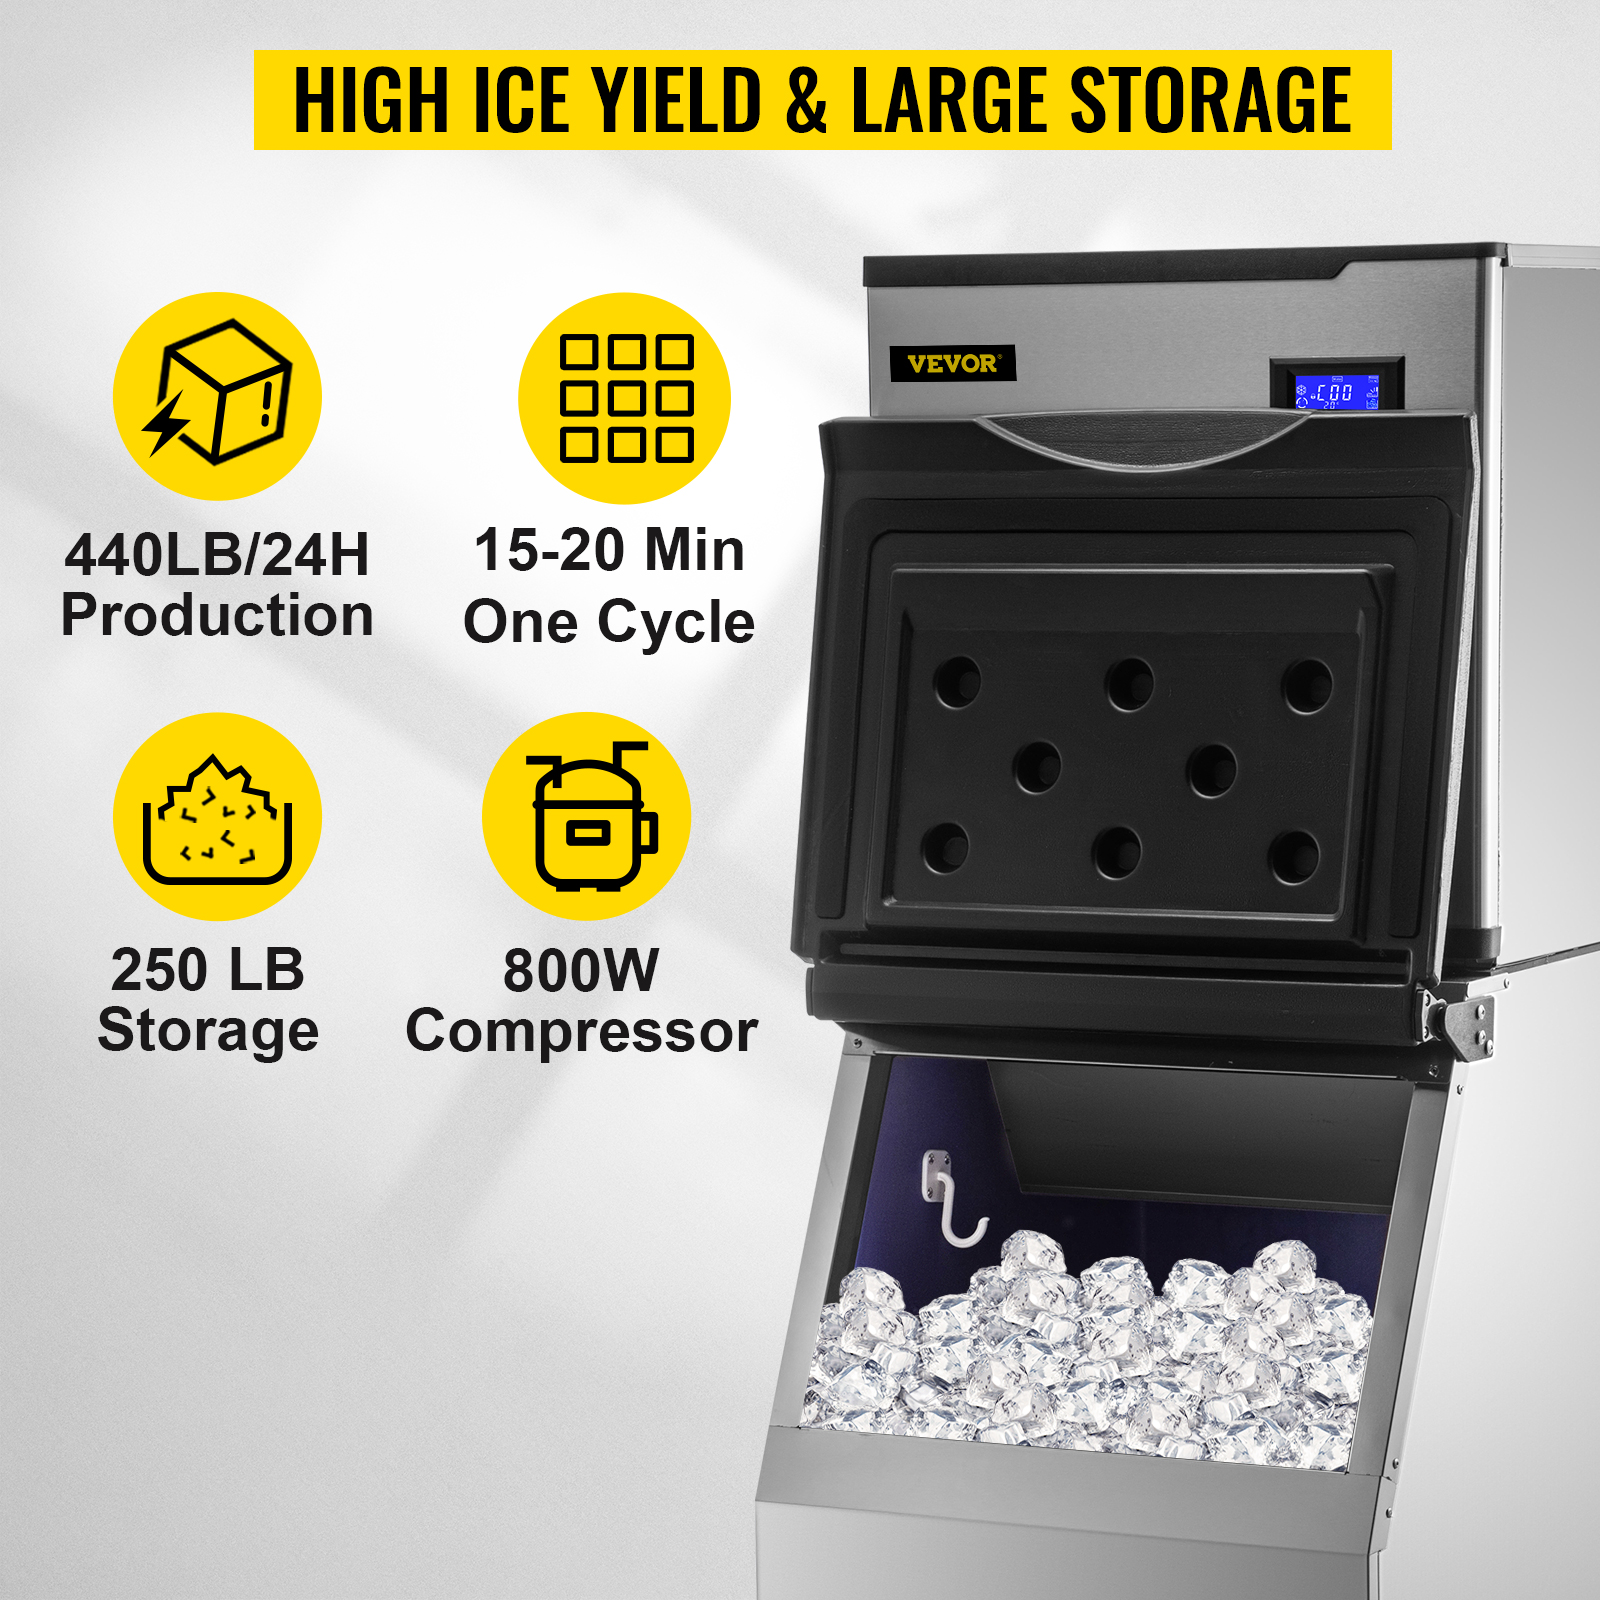 VEVOR 110V Commercial Ice Maker 440LB/24H, Industrial Modular Stainless Steel Ice Machine with 250LB Large Storage Bin, 234PCS Ice Cubes Ready in 8-15 Mins, Professional Refrigeration Equipment